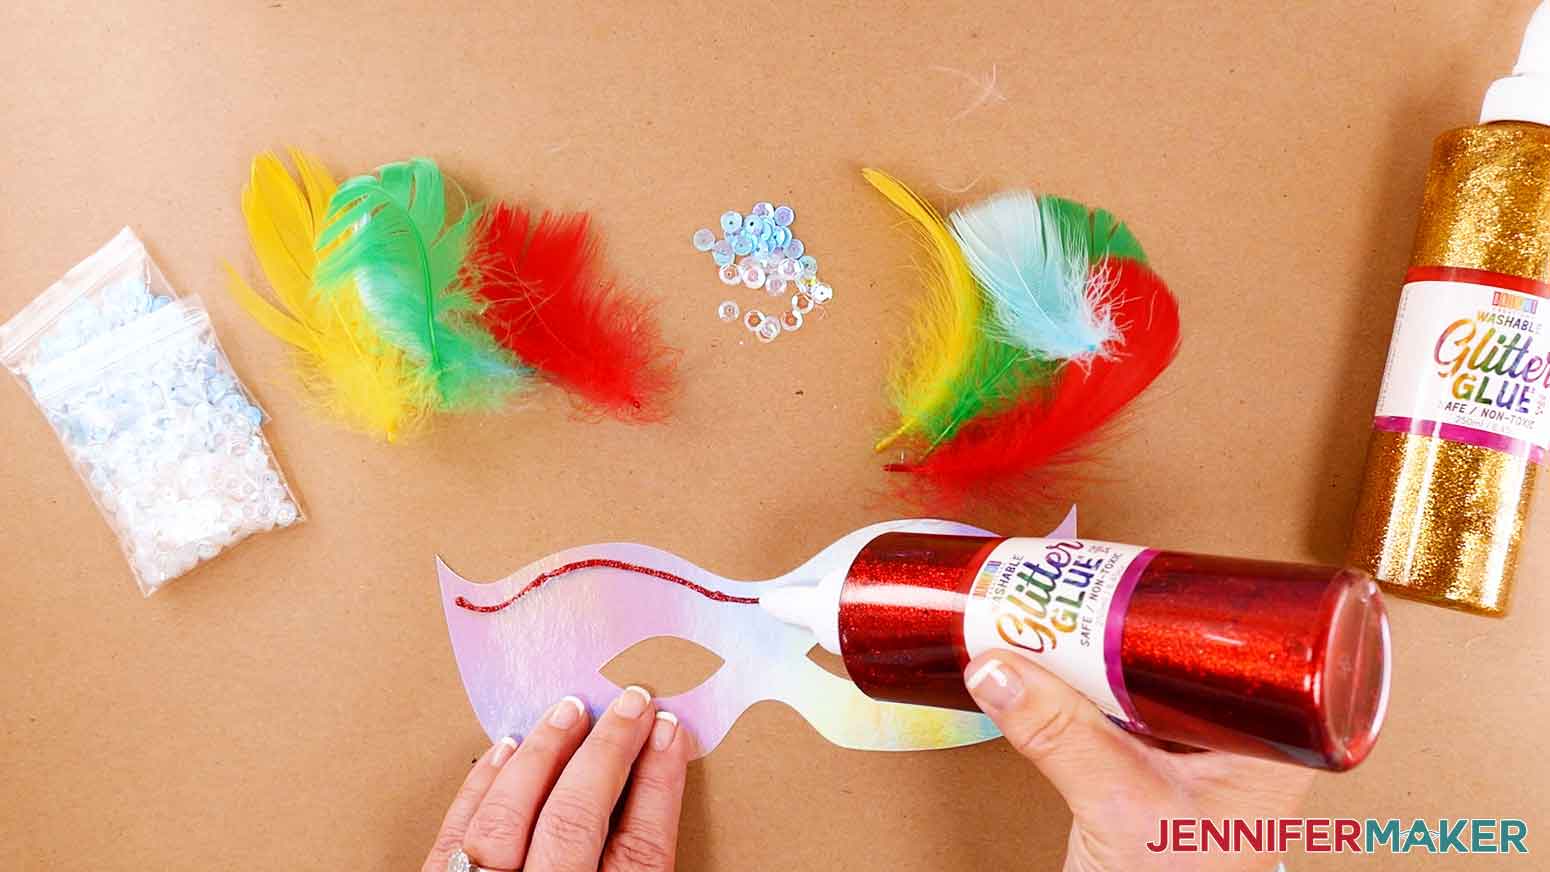 Apply glitter glue to DIY masquerade mask for a personalized design.